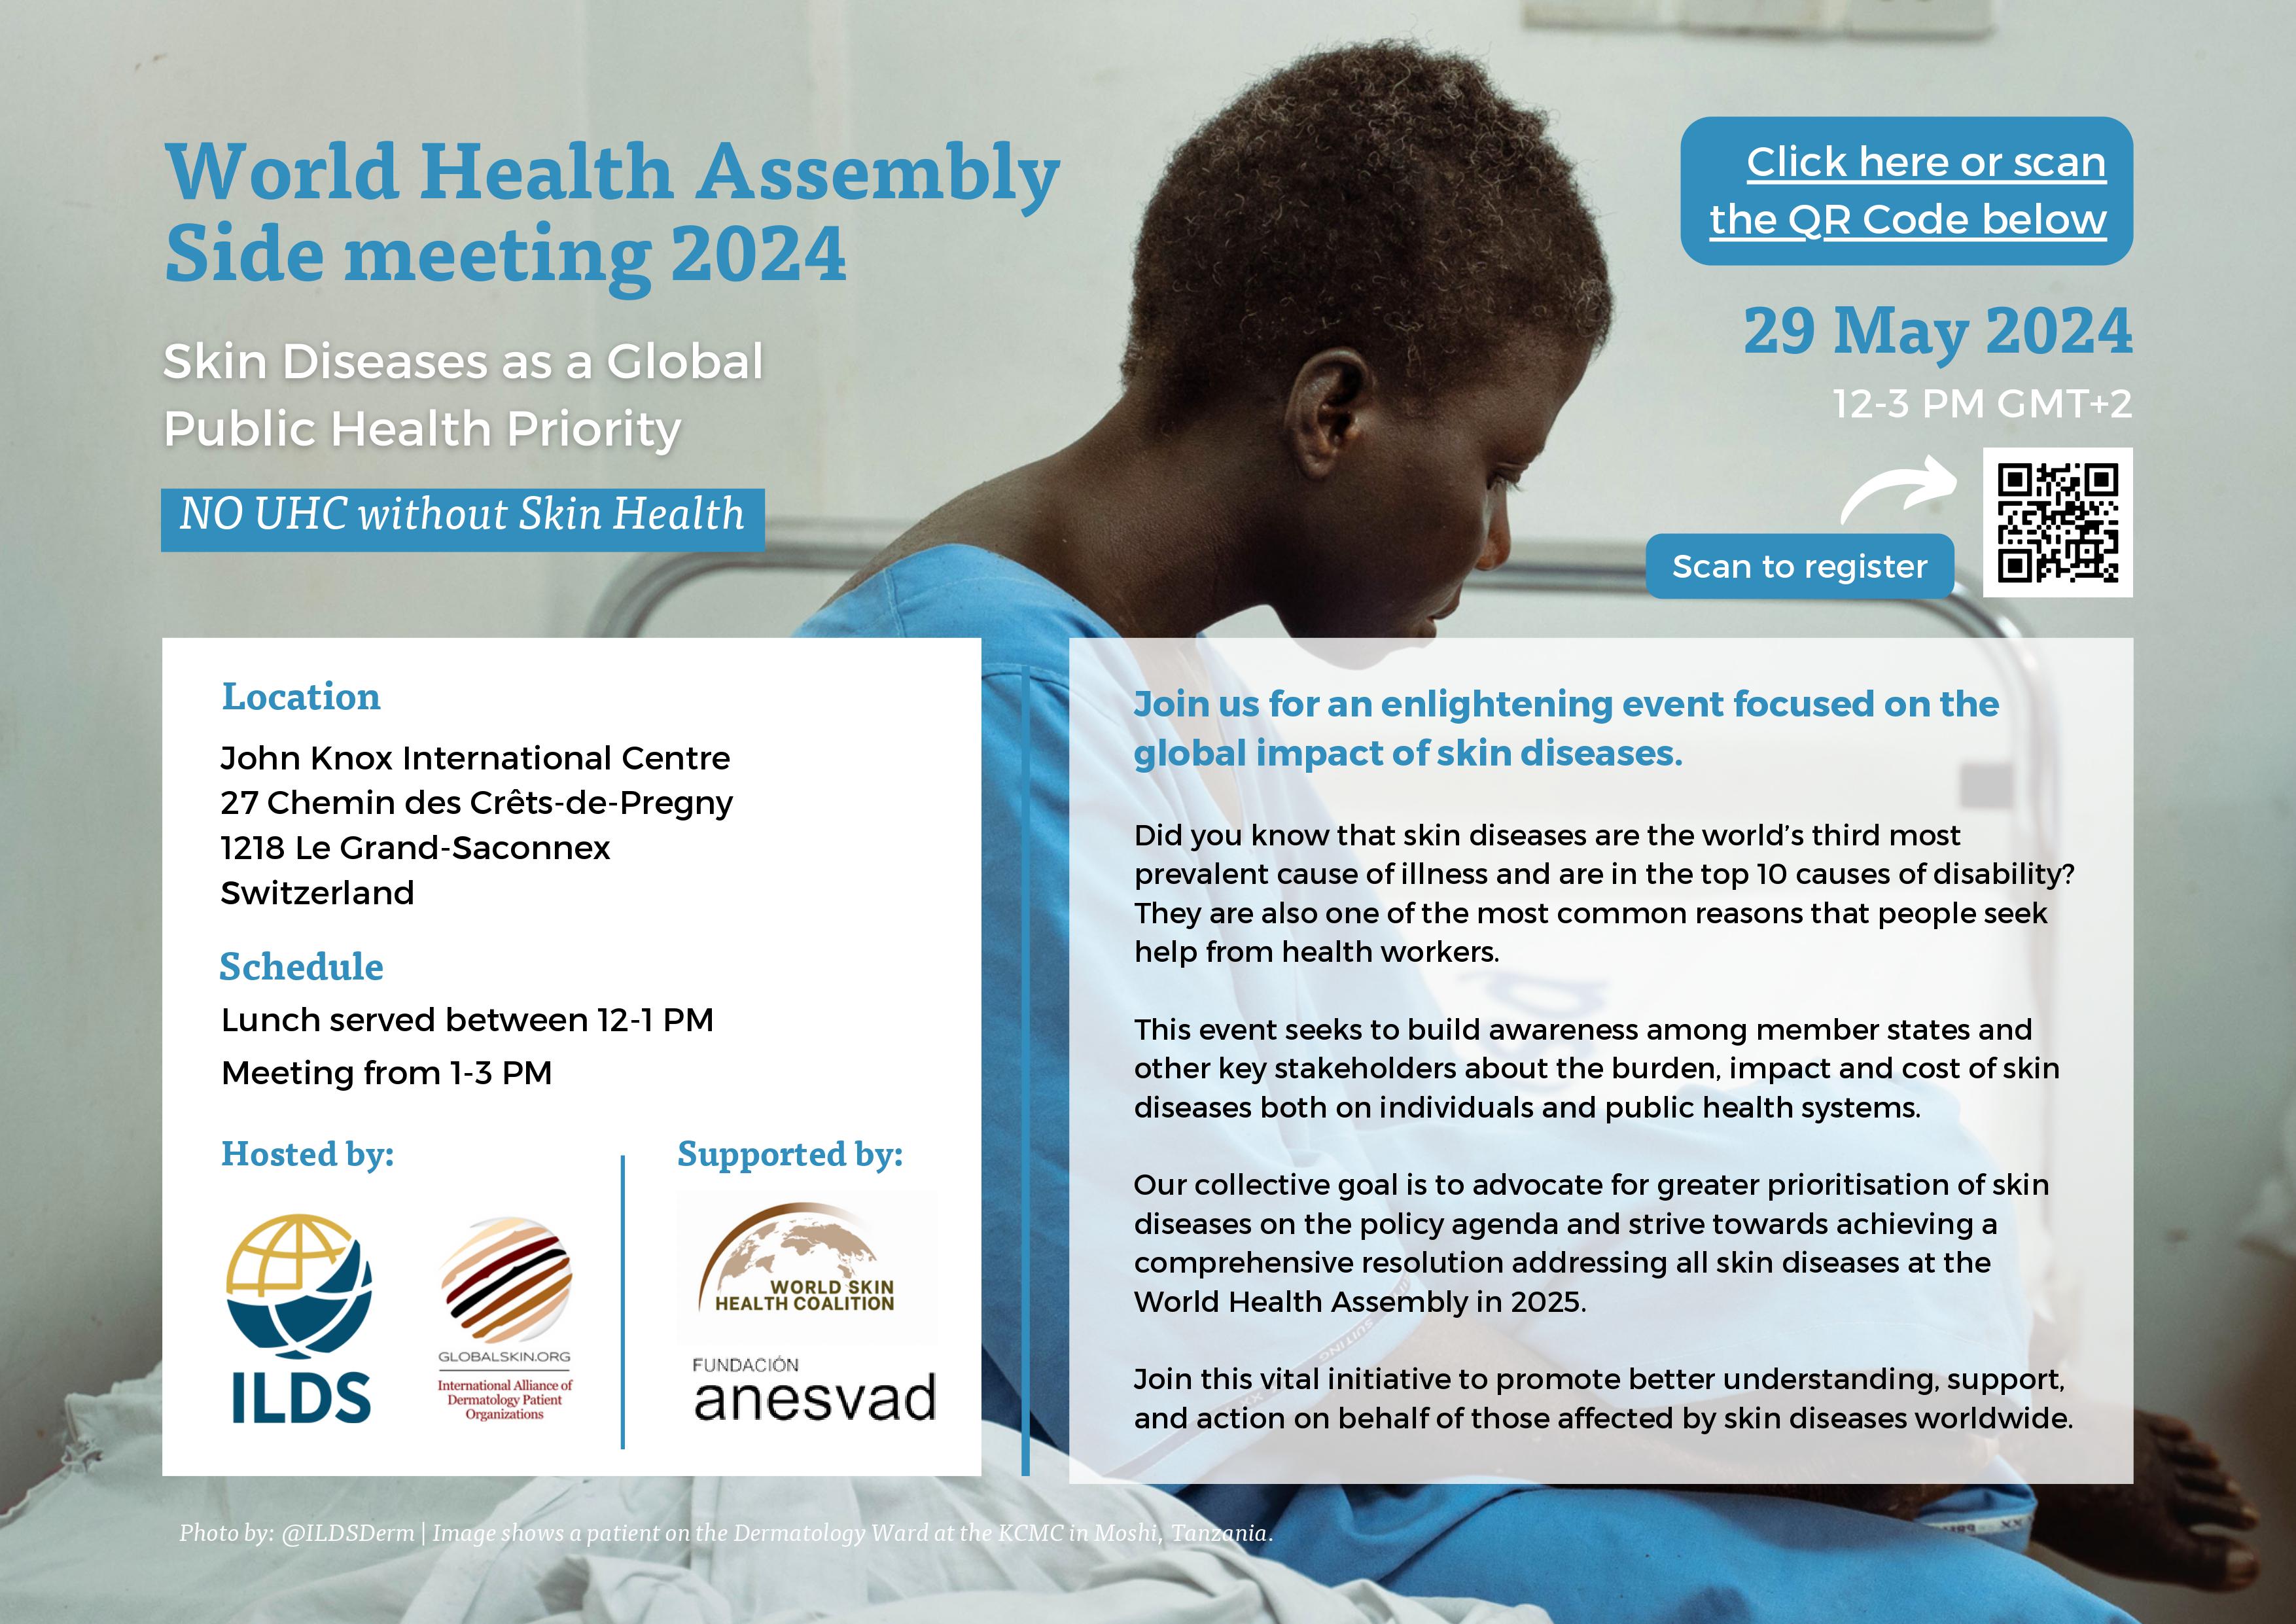 77TH World Health Assembly Side Meeting on Skin Disease - Skin Diseases as a Global Public Health Priority